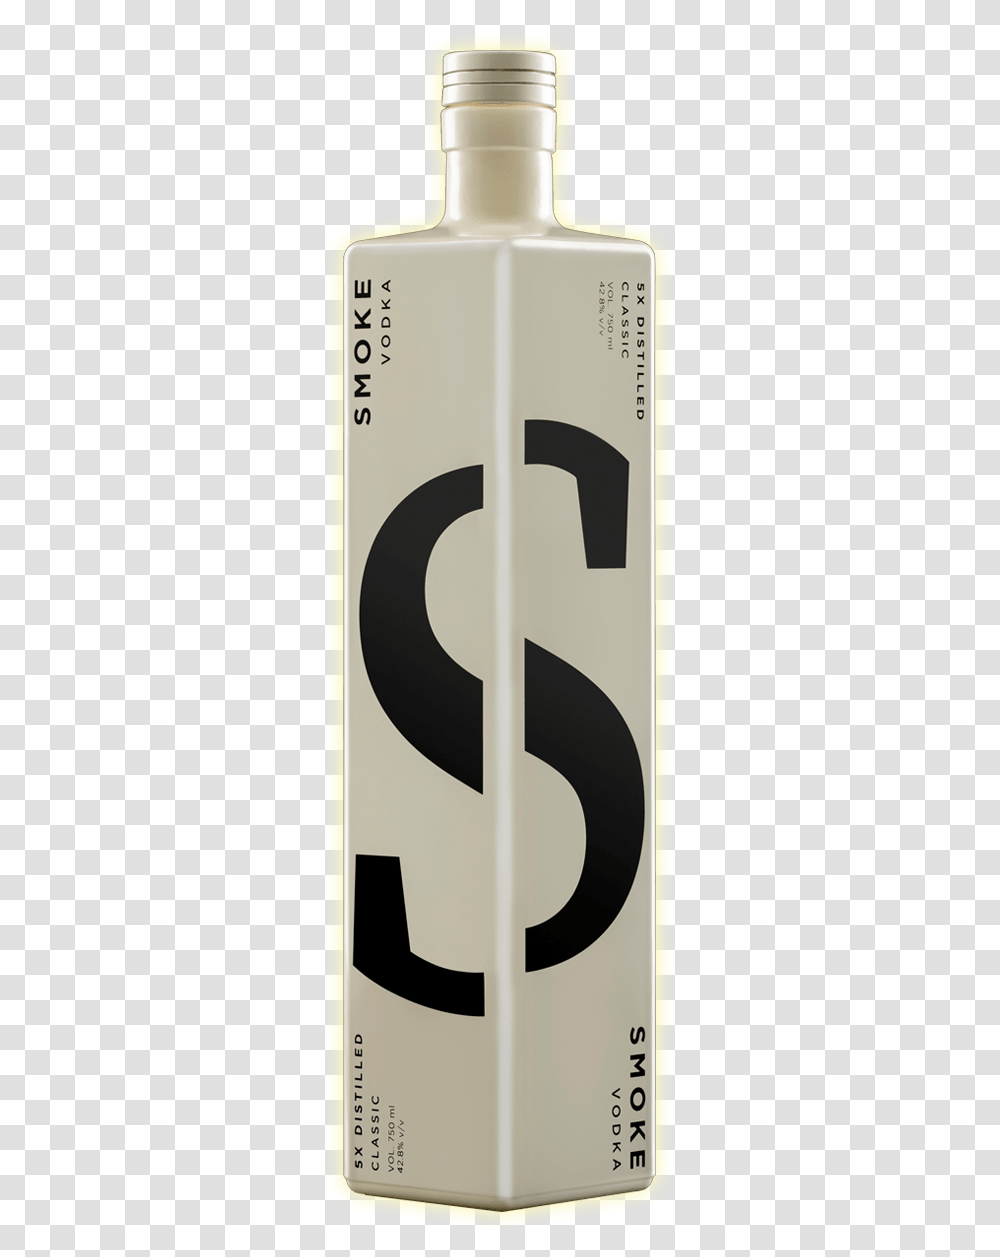 Smoke Vodka India Price, Number, Fire Hydrant Transparent Png